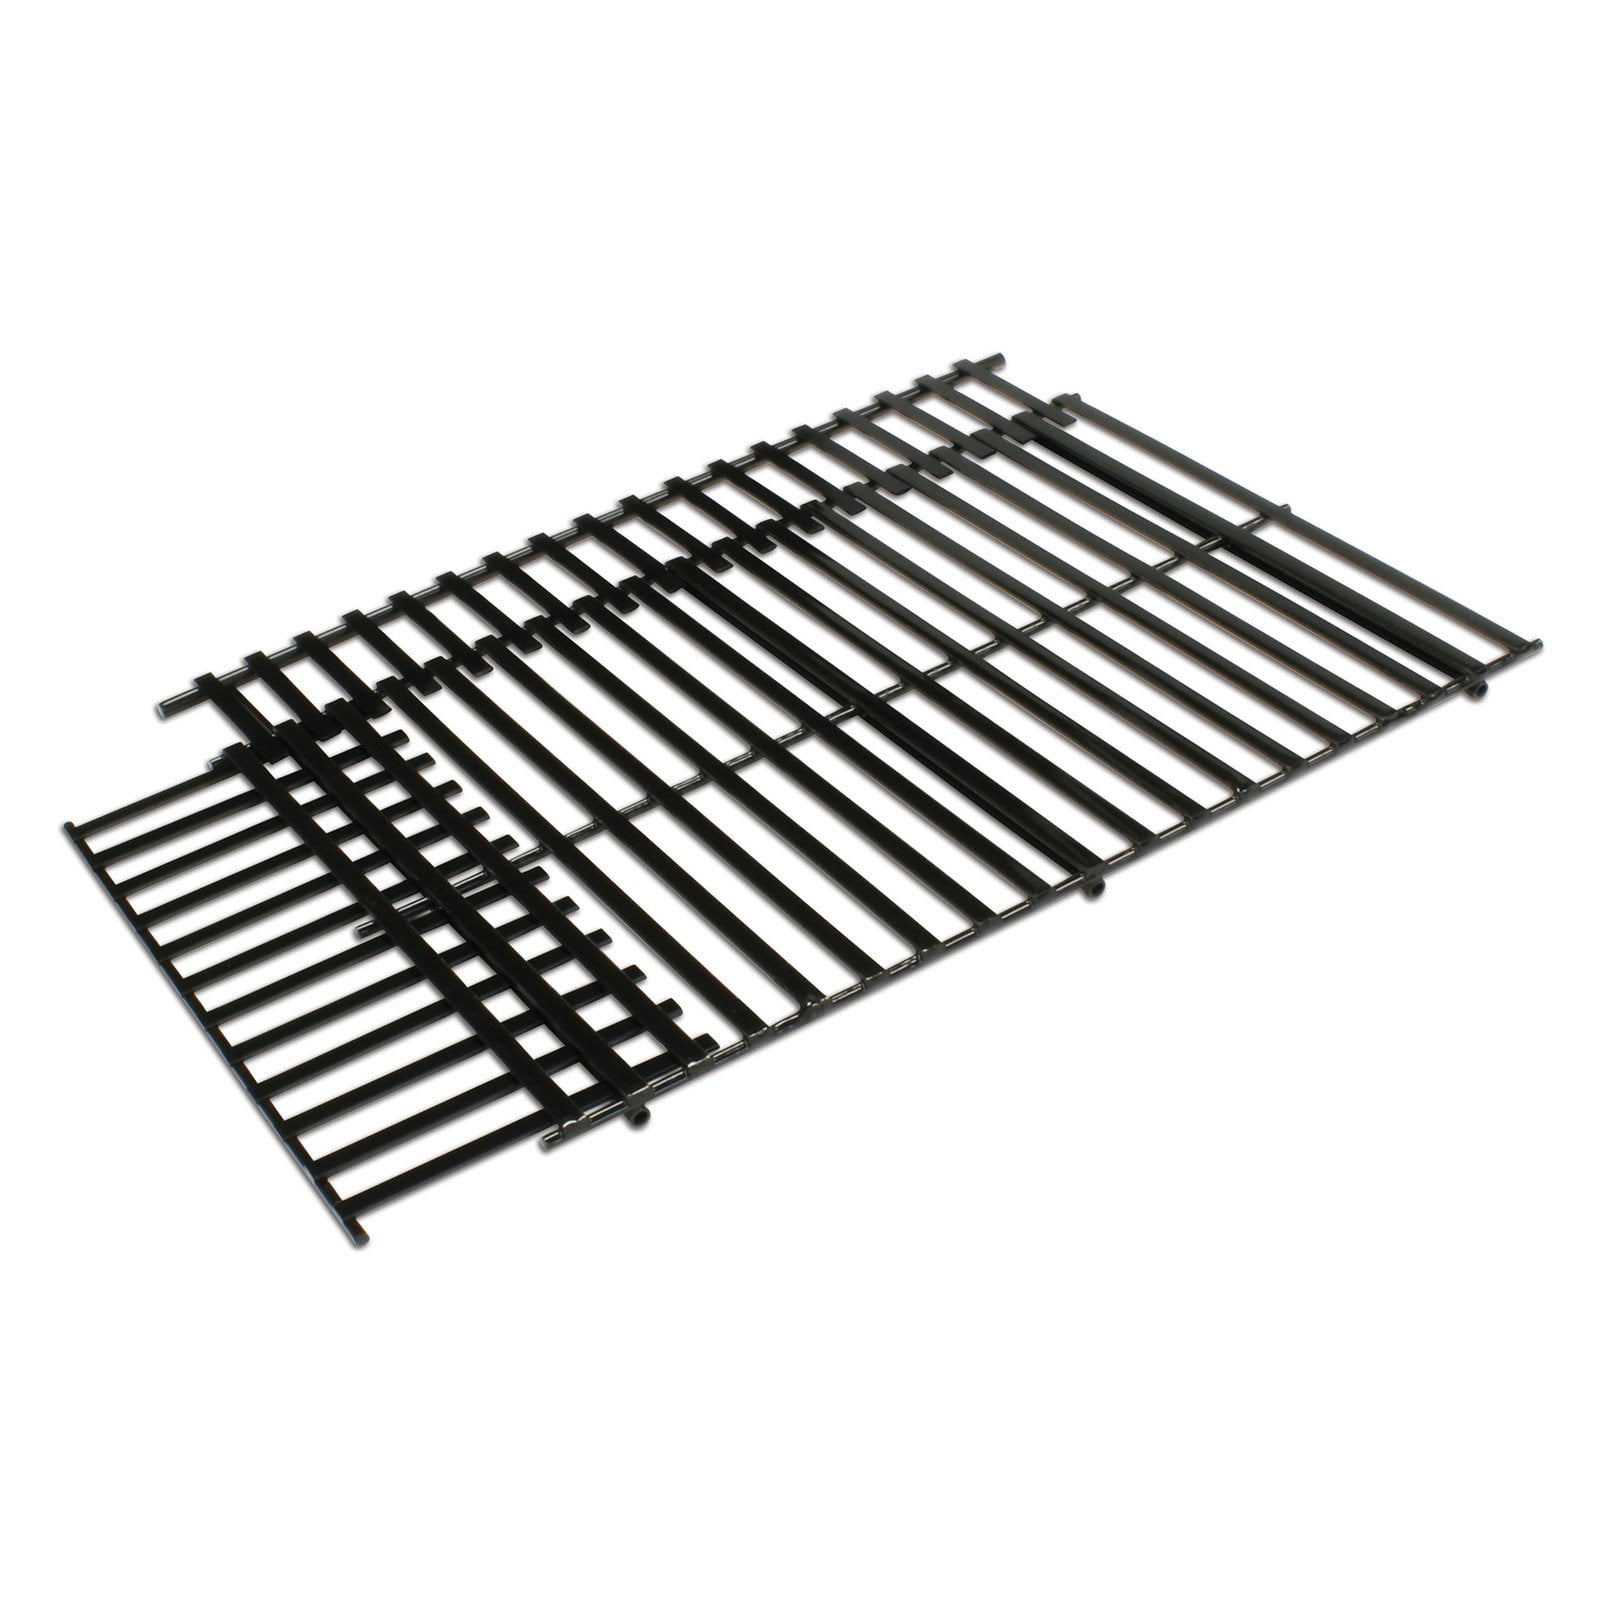 UNIVERSAL BBQ REPLACEMENT COOKING GRID GRILL PORCELAIN EXTENDABLE 